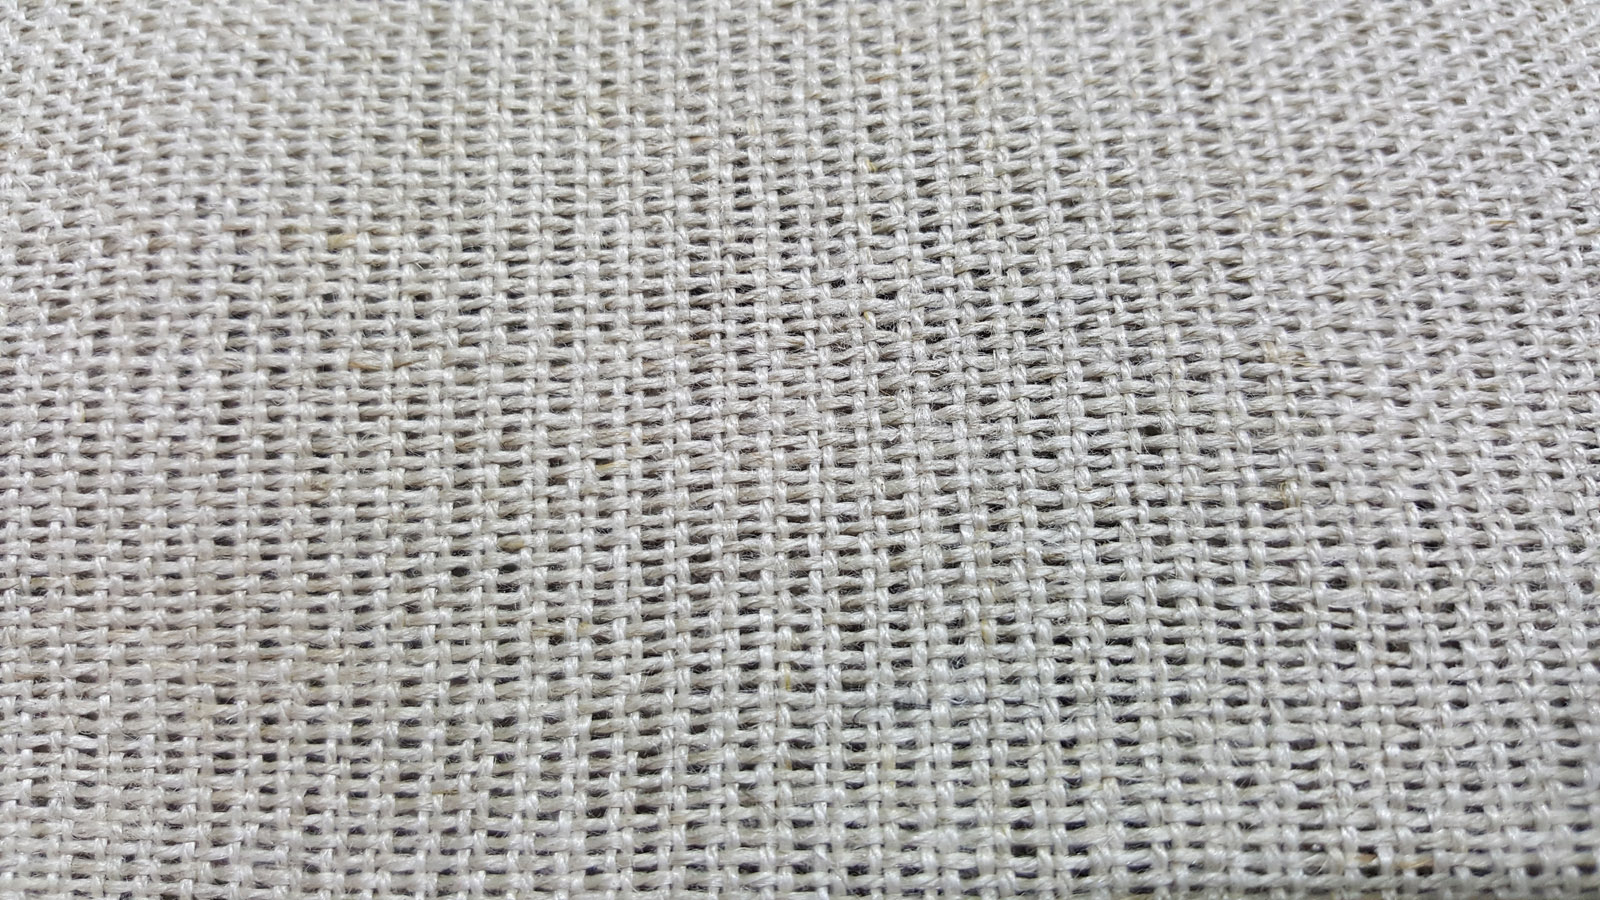  flax fabric in plain weave